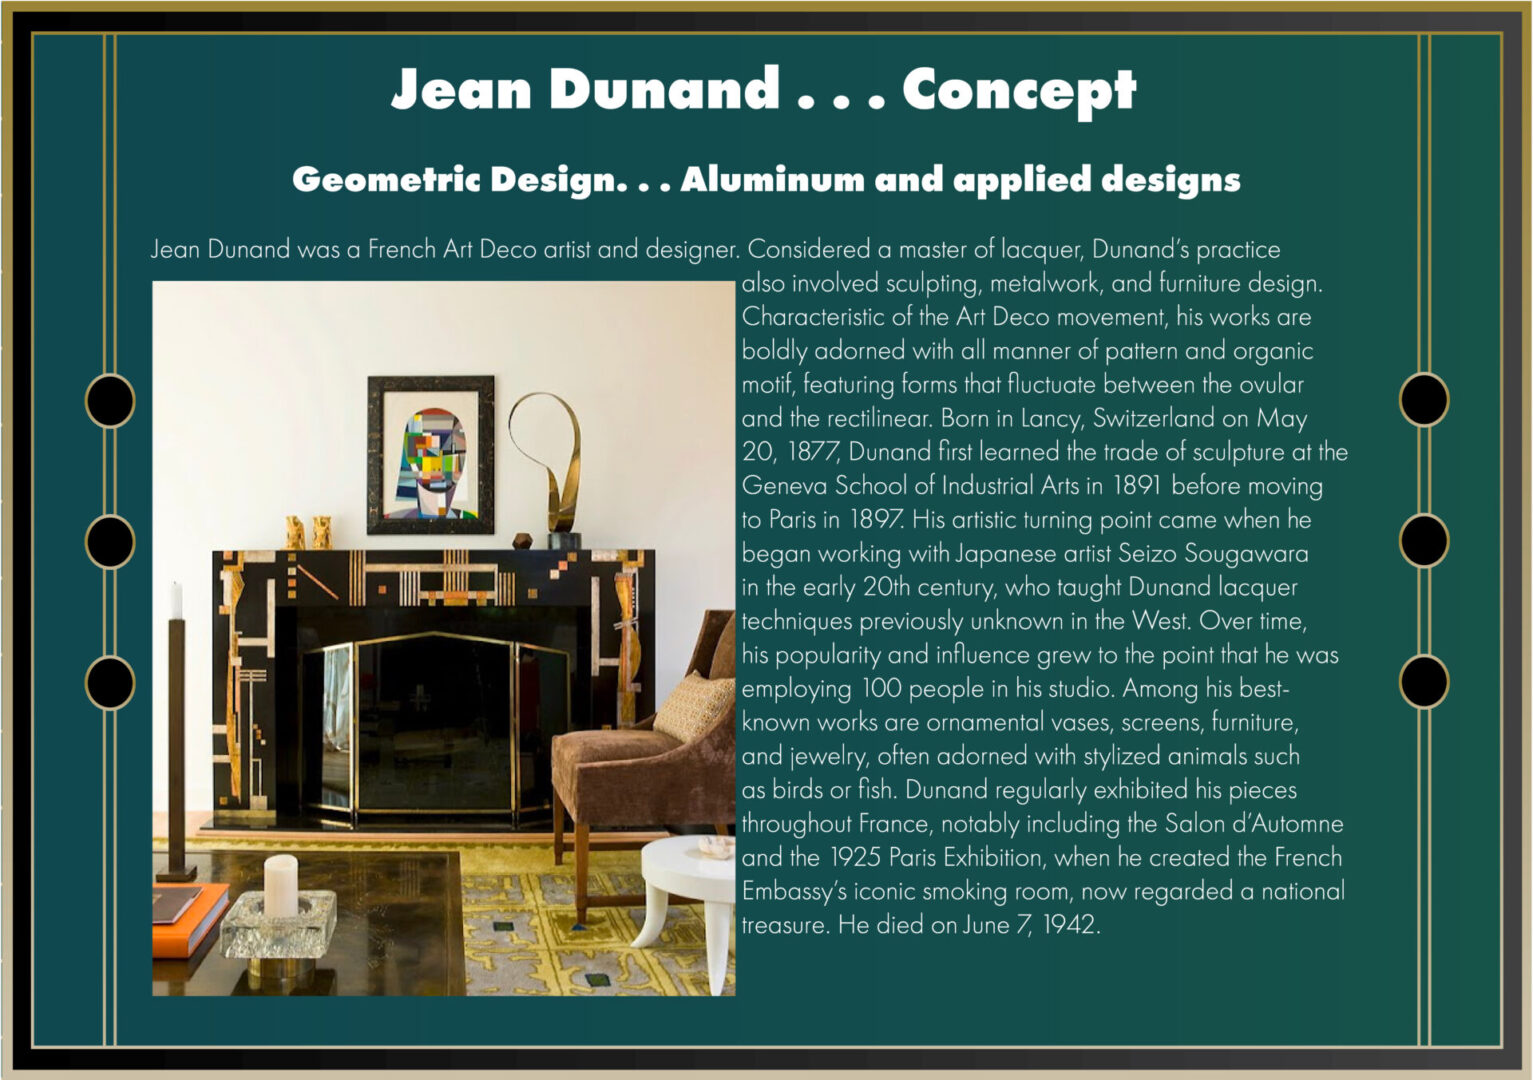 Aluminum and applied designs conceptualized by Jean Dunand